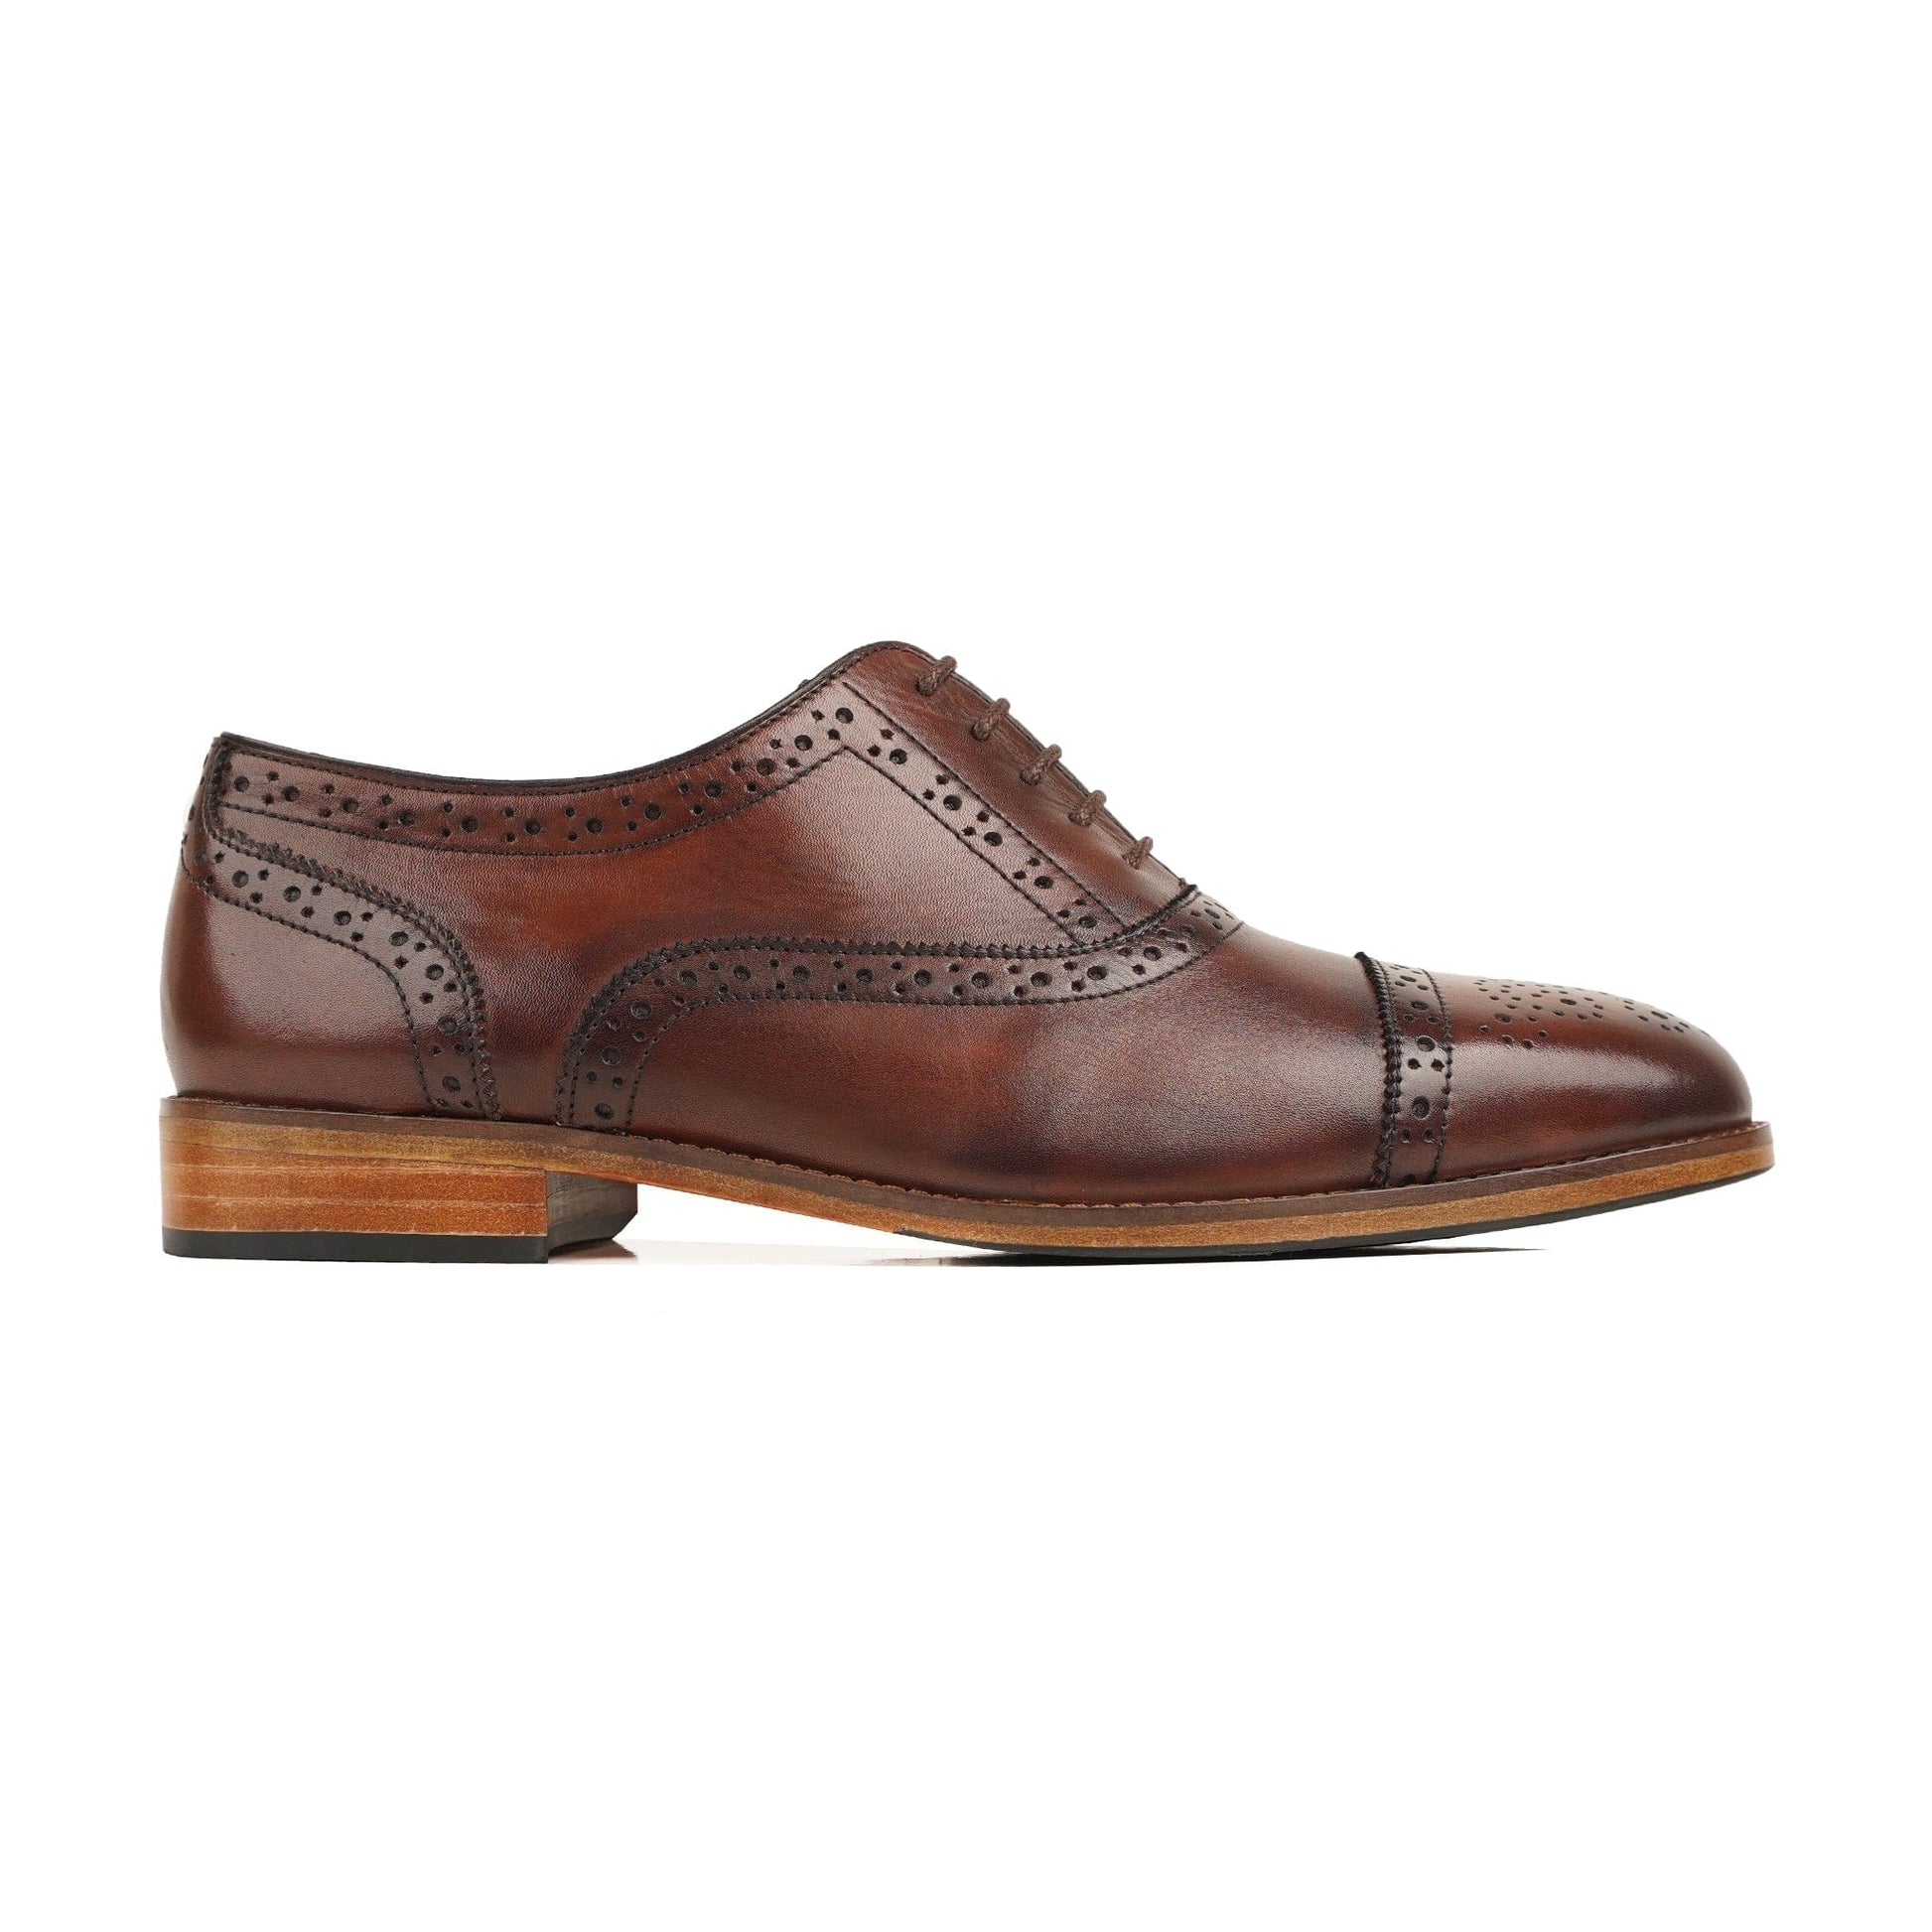 Bristol Oxford Shoes Leather Boots